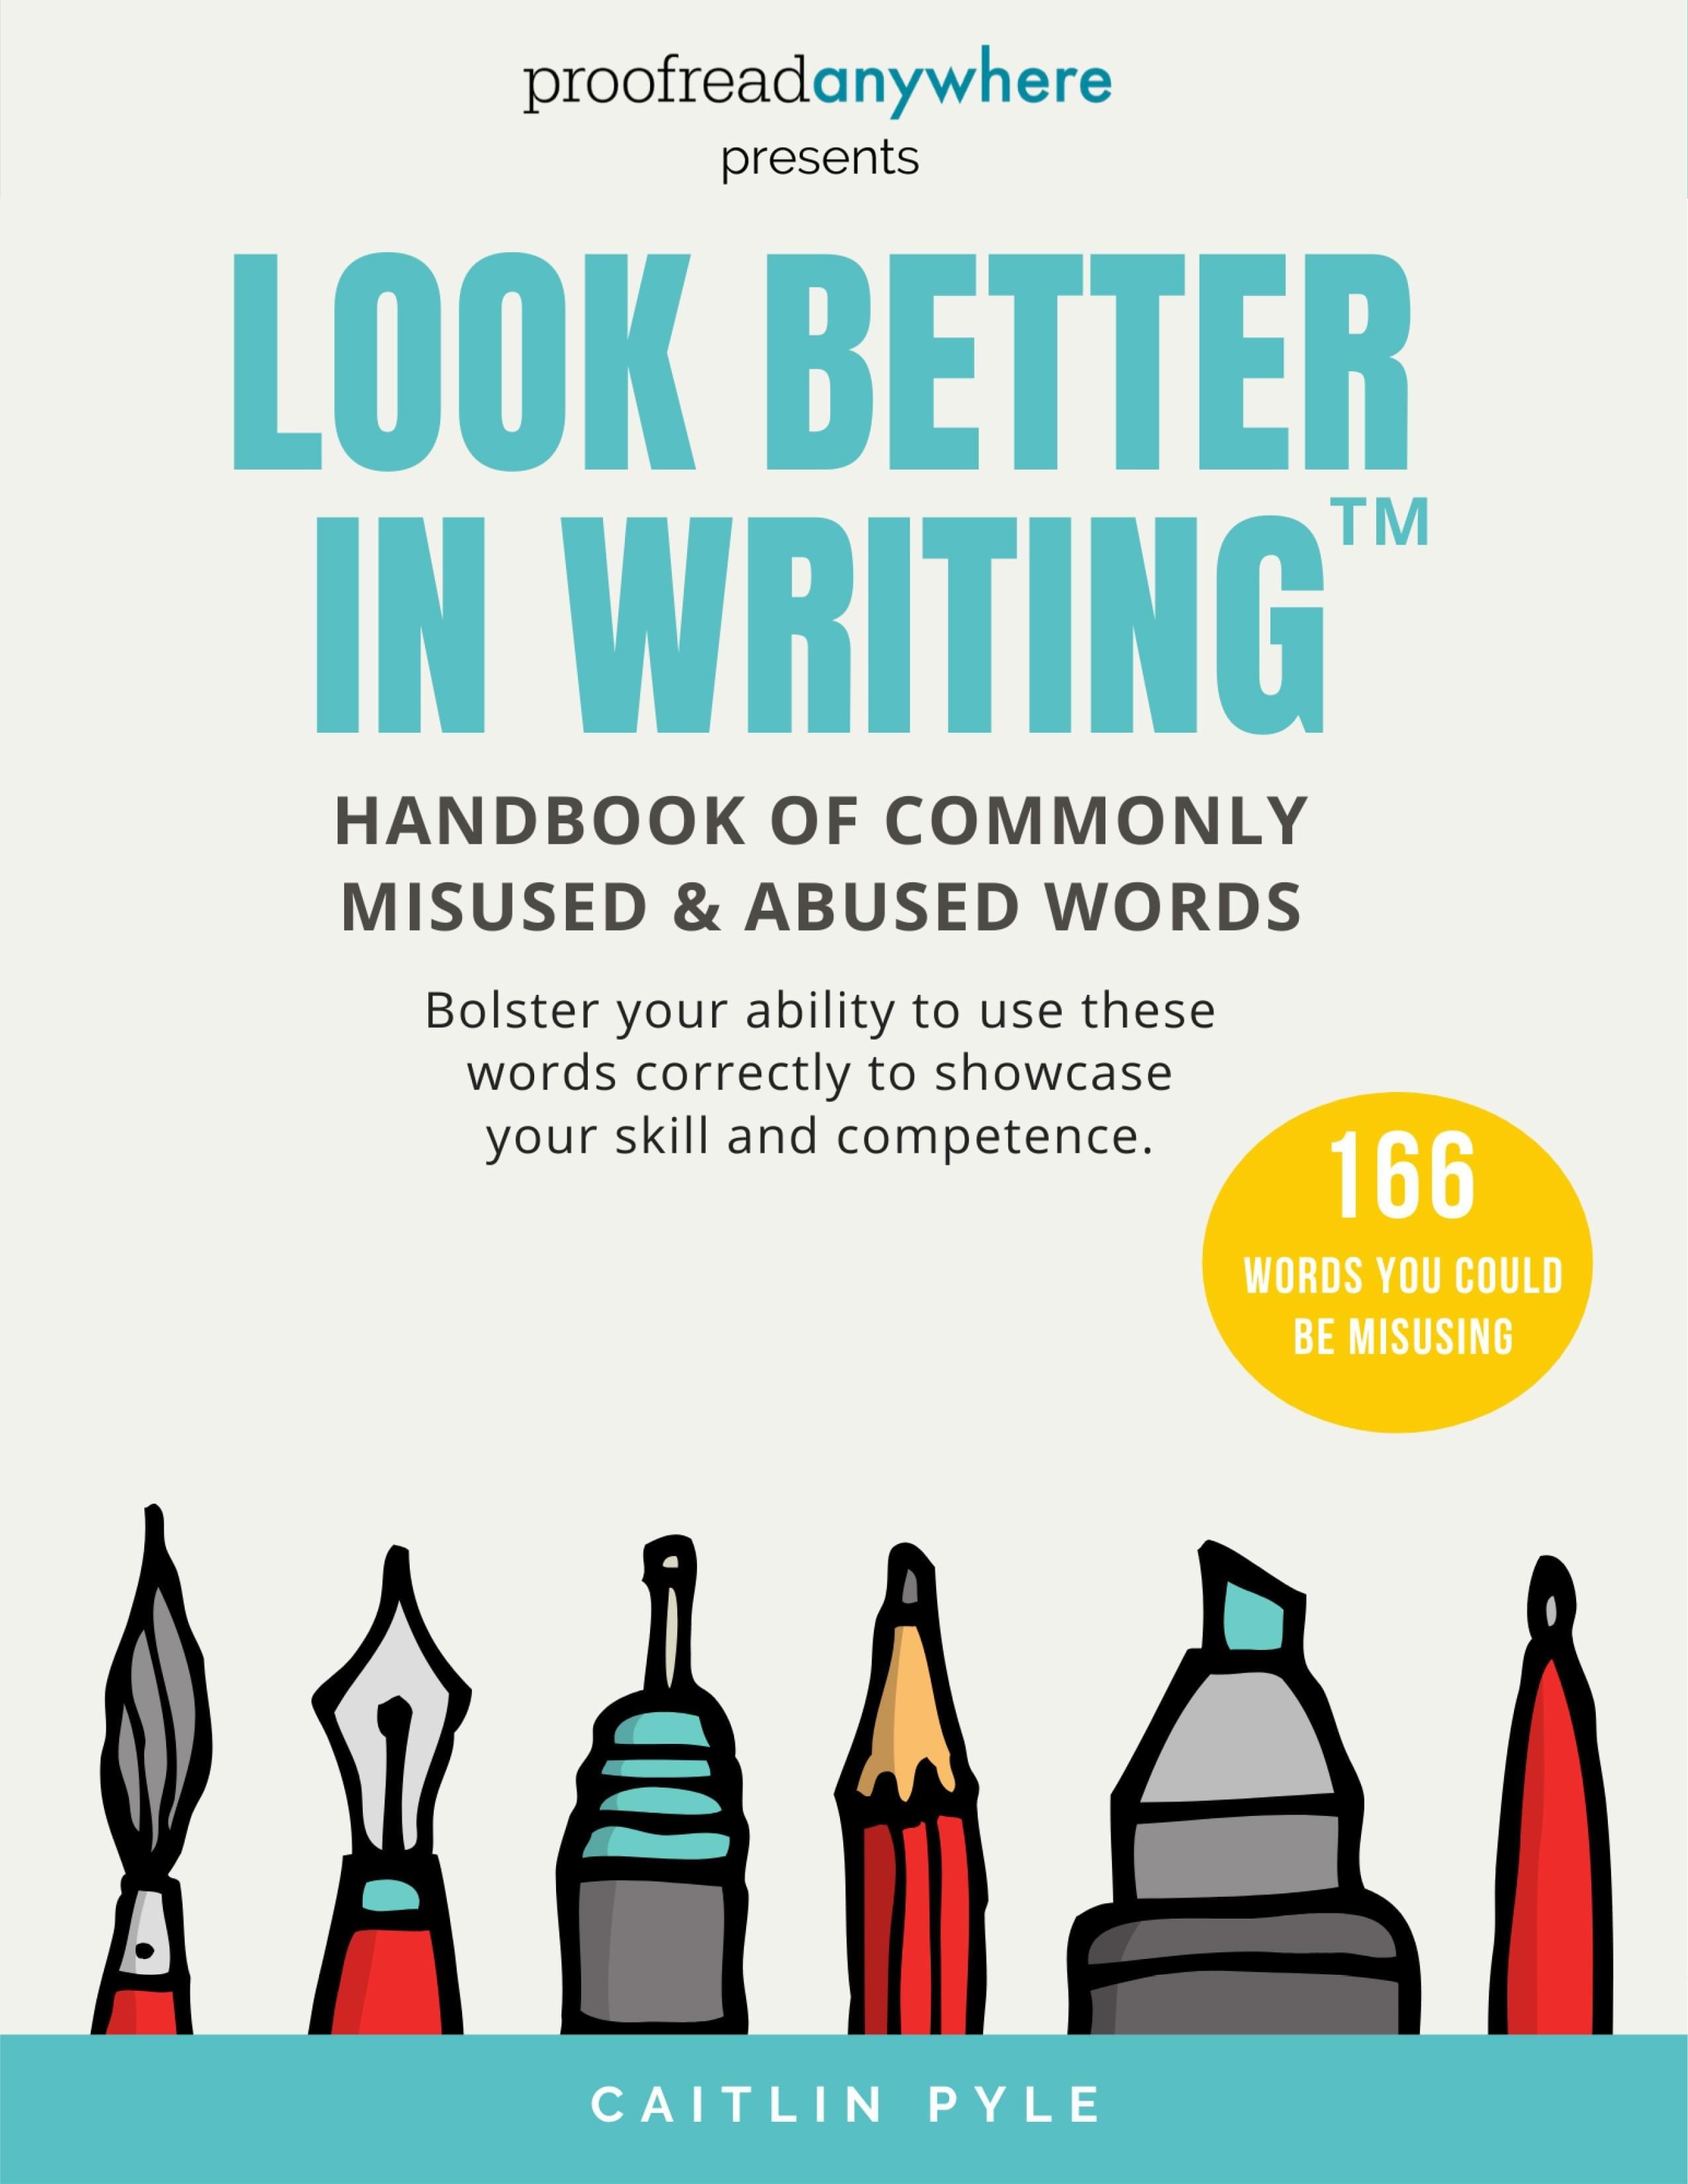 Look Better in Writing handbook of commonly misused and abused words